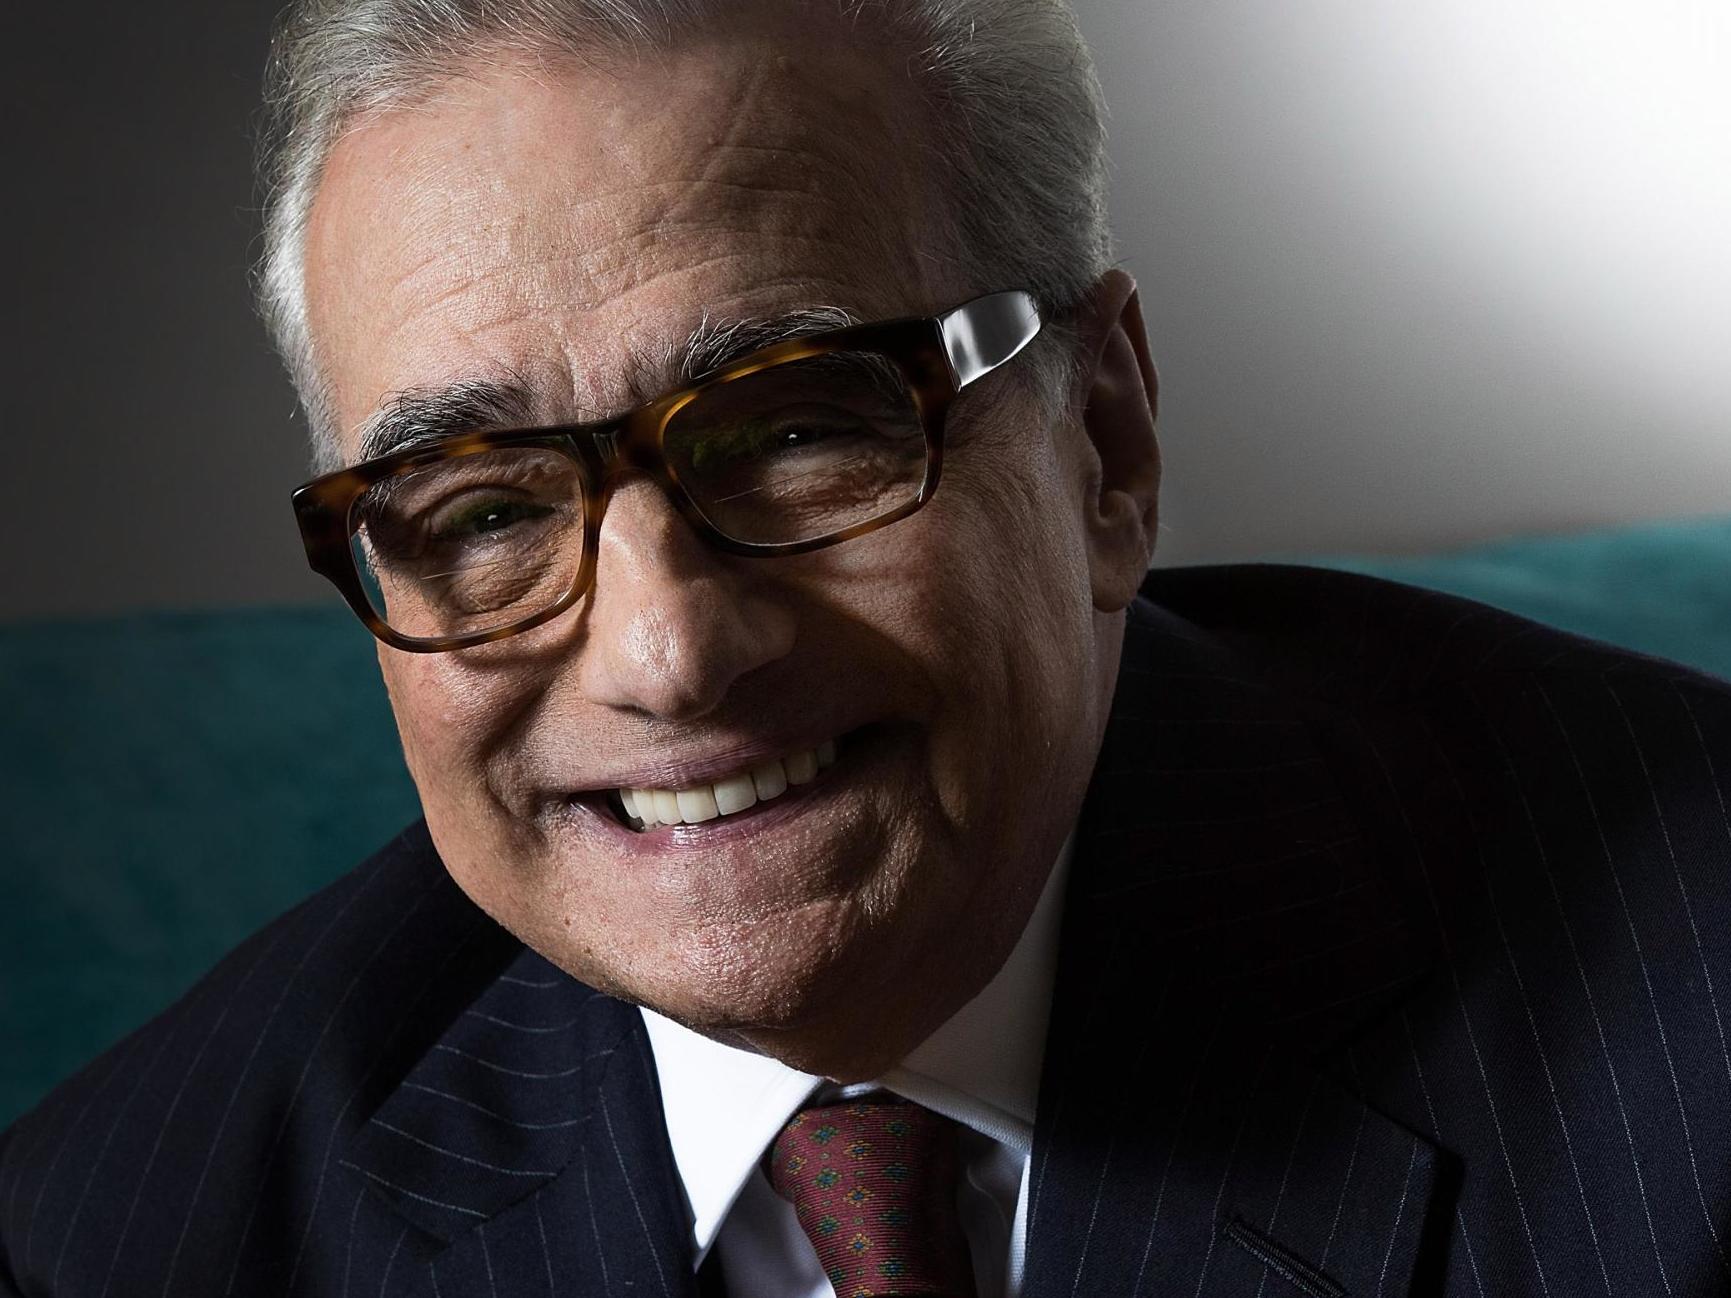 ‘I would love to just take a year and be with friends – we’re all going’: Scorsese reflects on ‘The Irishman’ and looks ahead to the future